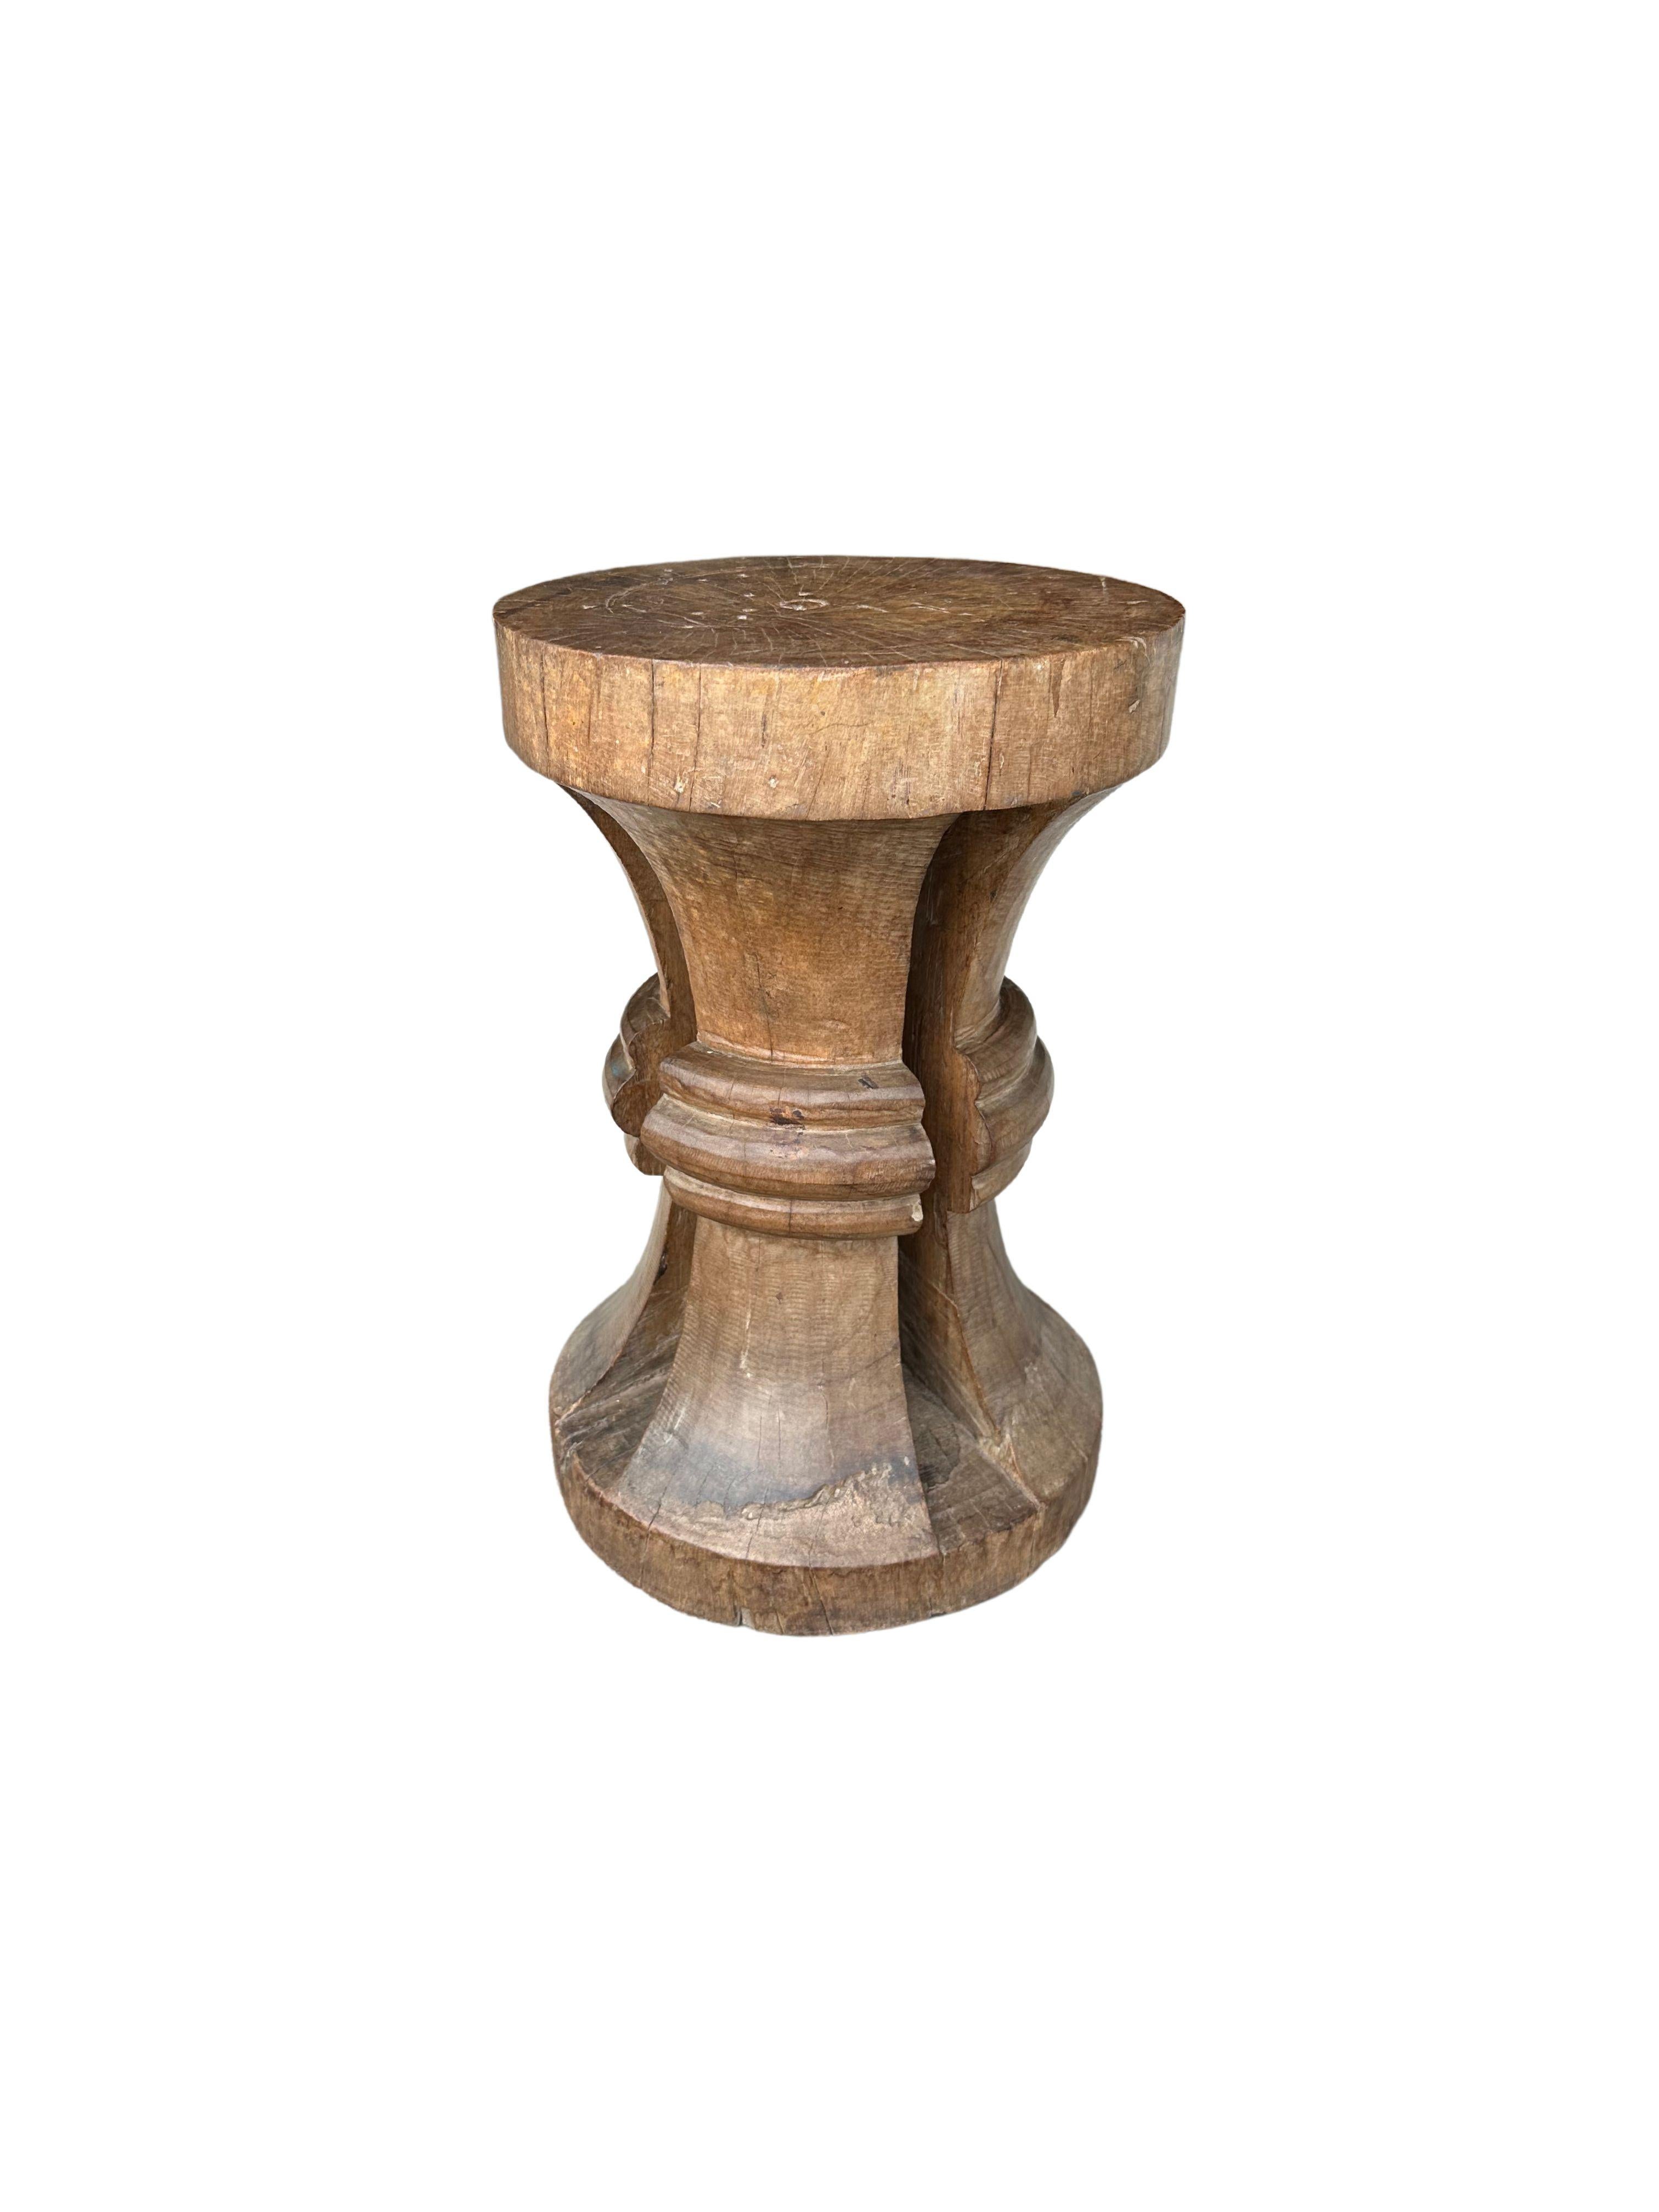 A tribal stool hand-carved by the tribes people of Nias Island, Indonesia. Nias is the largest island amidst the Mentawai Archipelago, located off the North-western coast of Sumatra, Indonesia. A wonderful sculptural object that features an